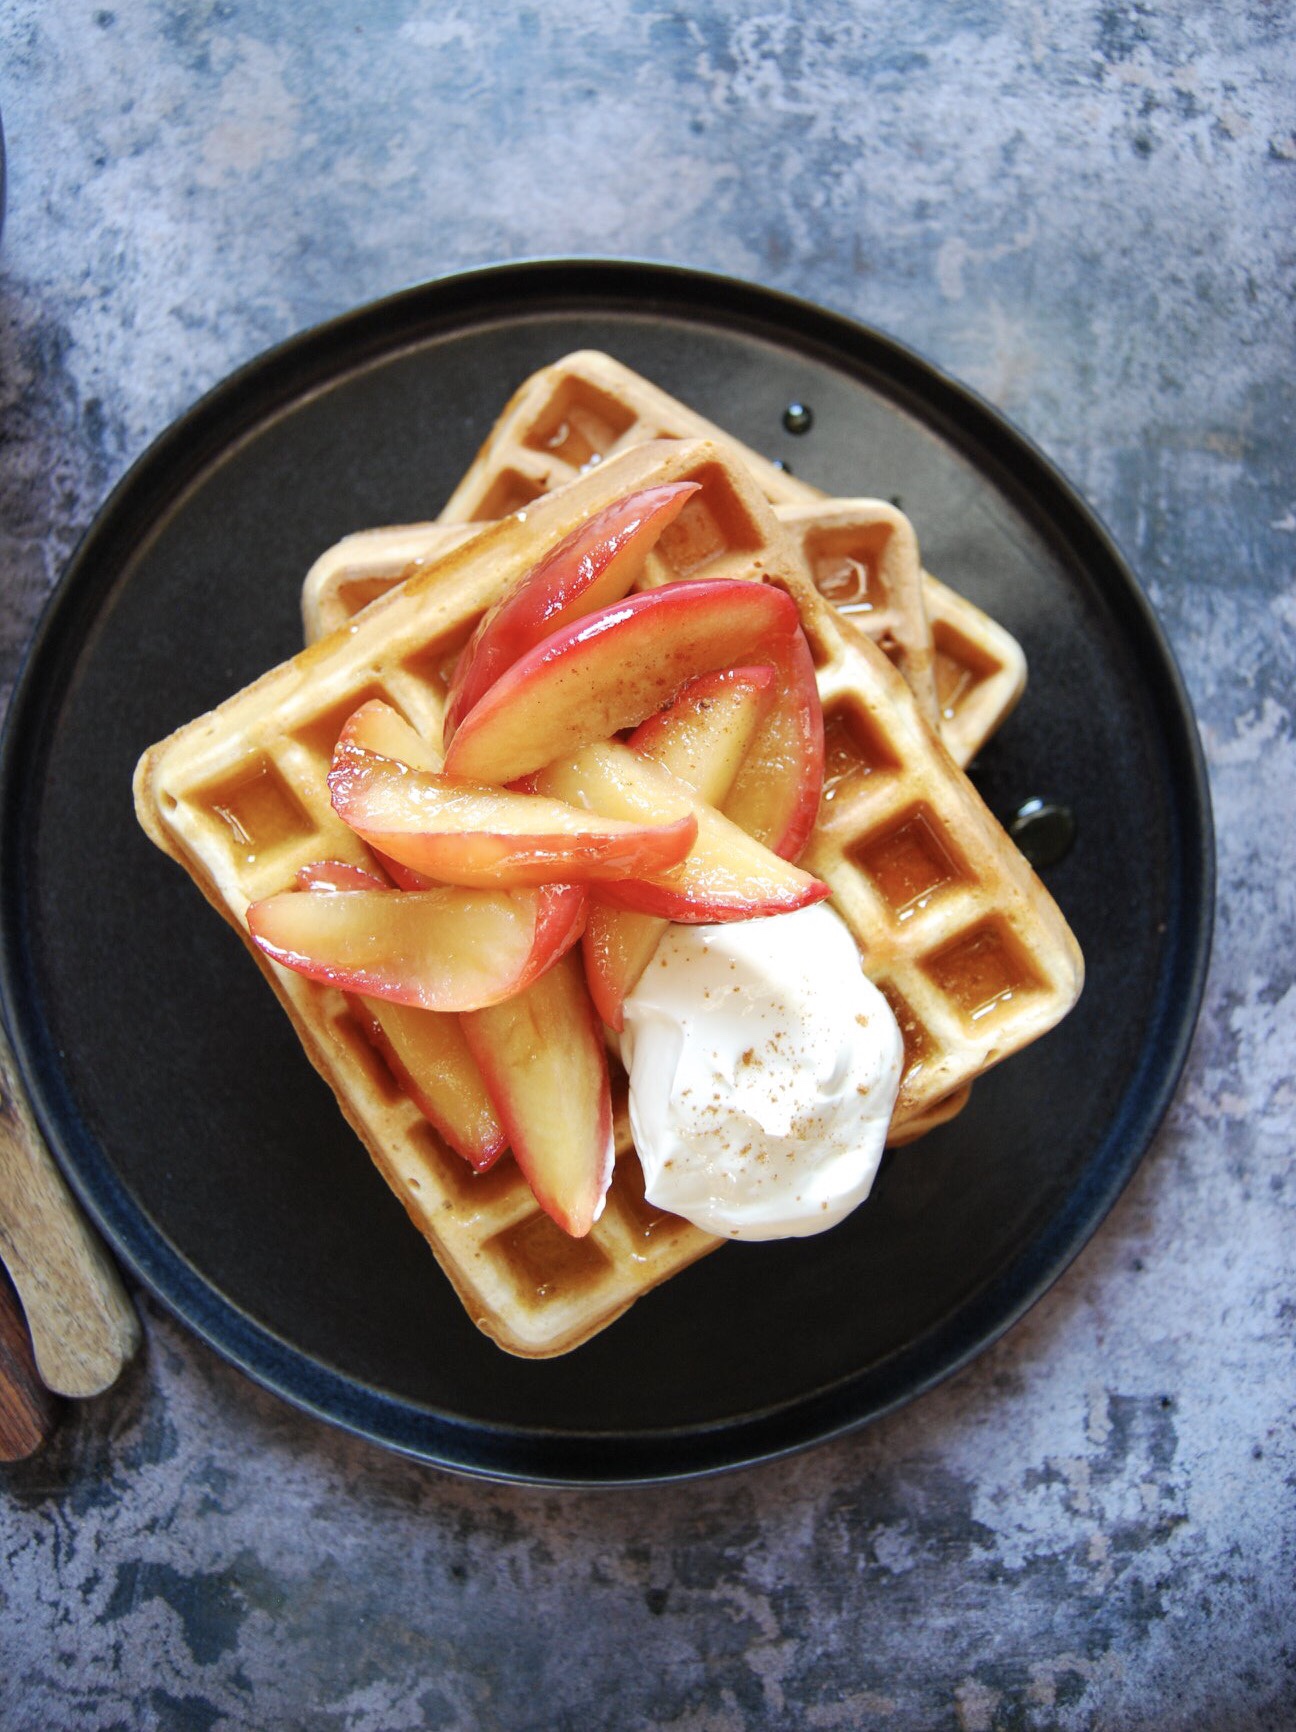 A black plate of waffles topped with pink apples and greek yoghurt on a grey background